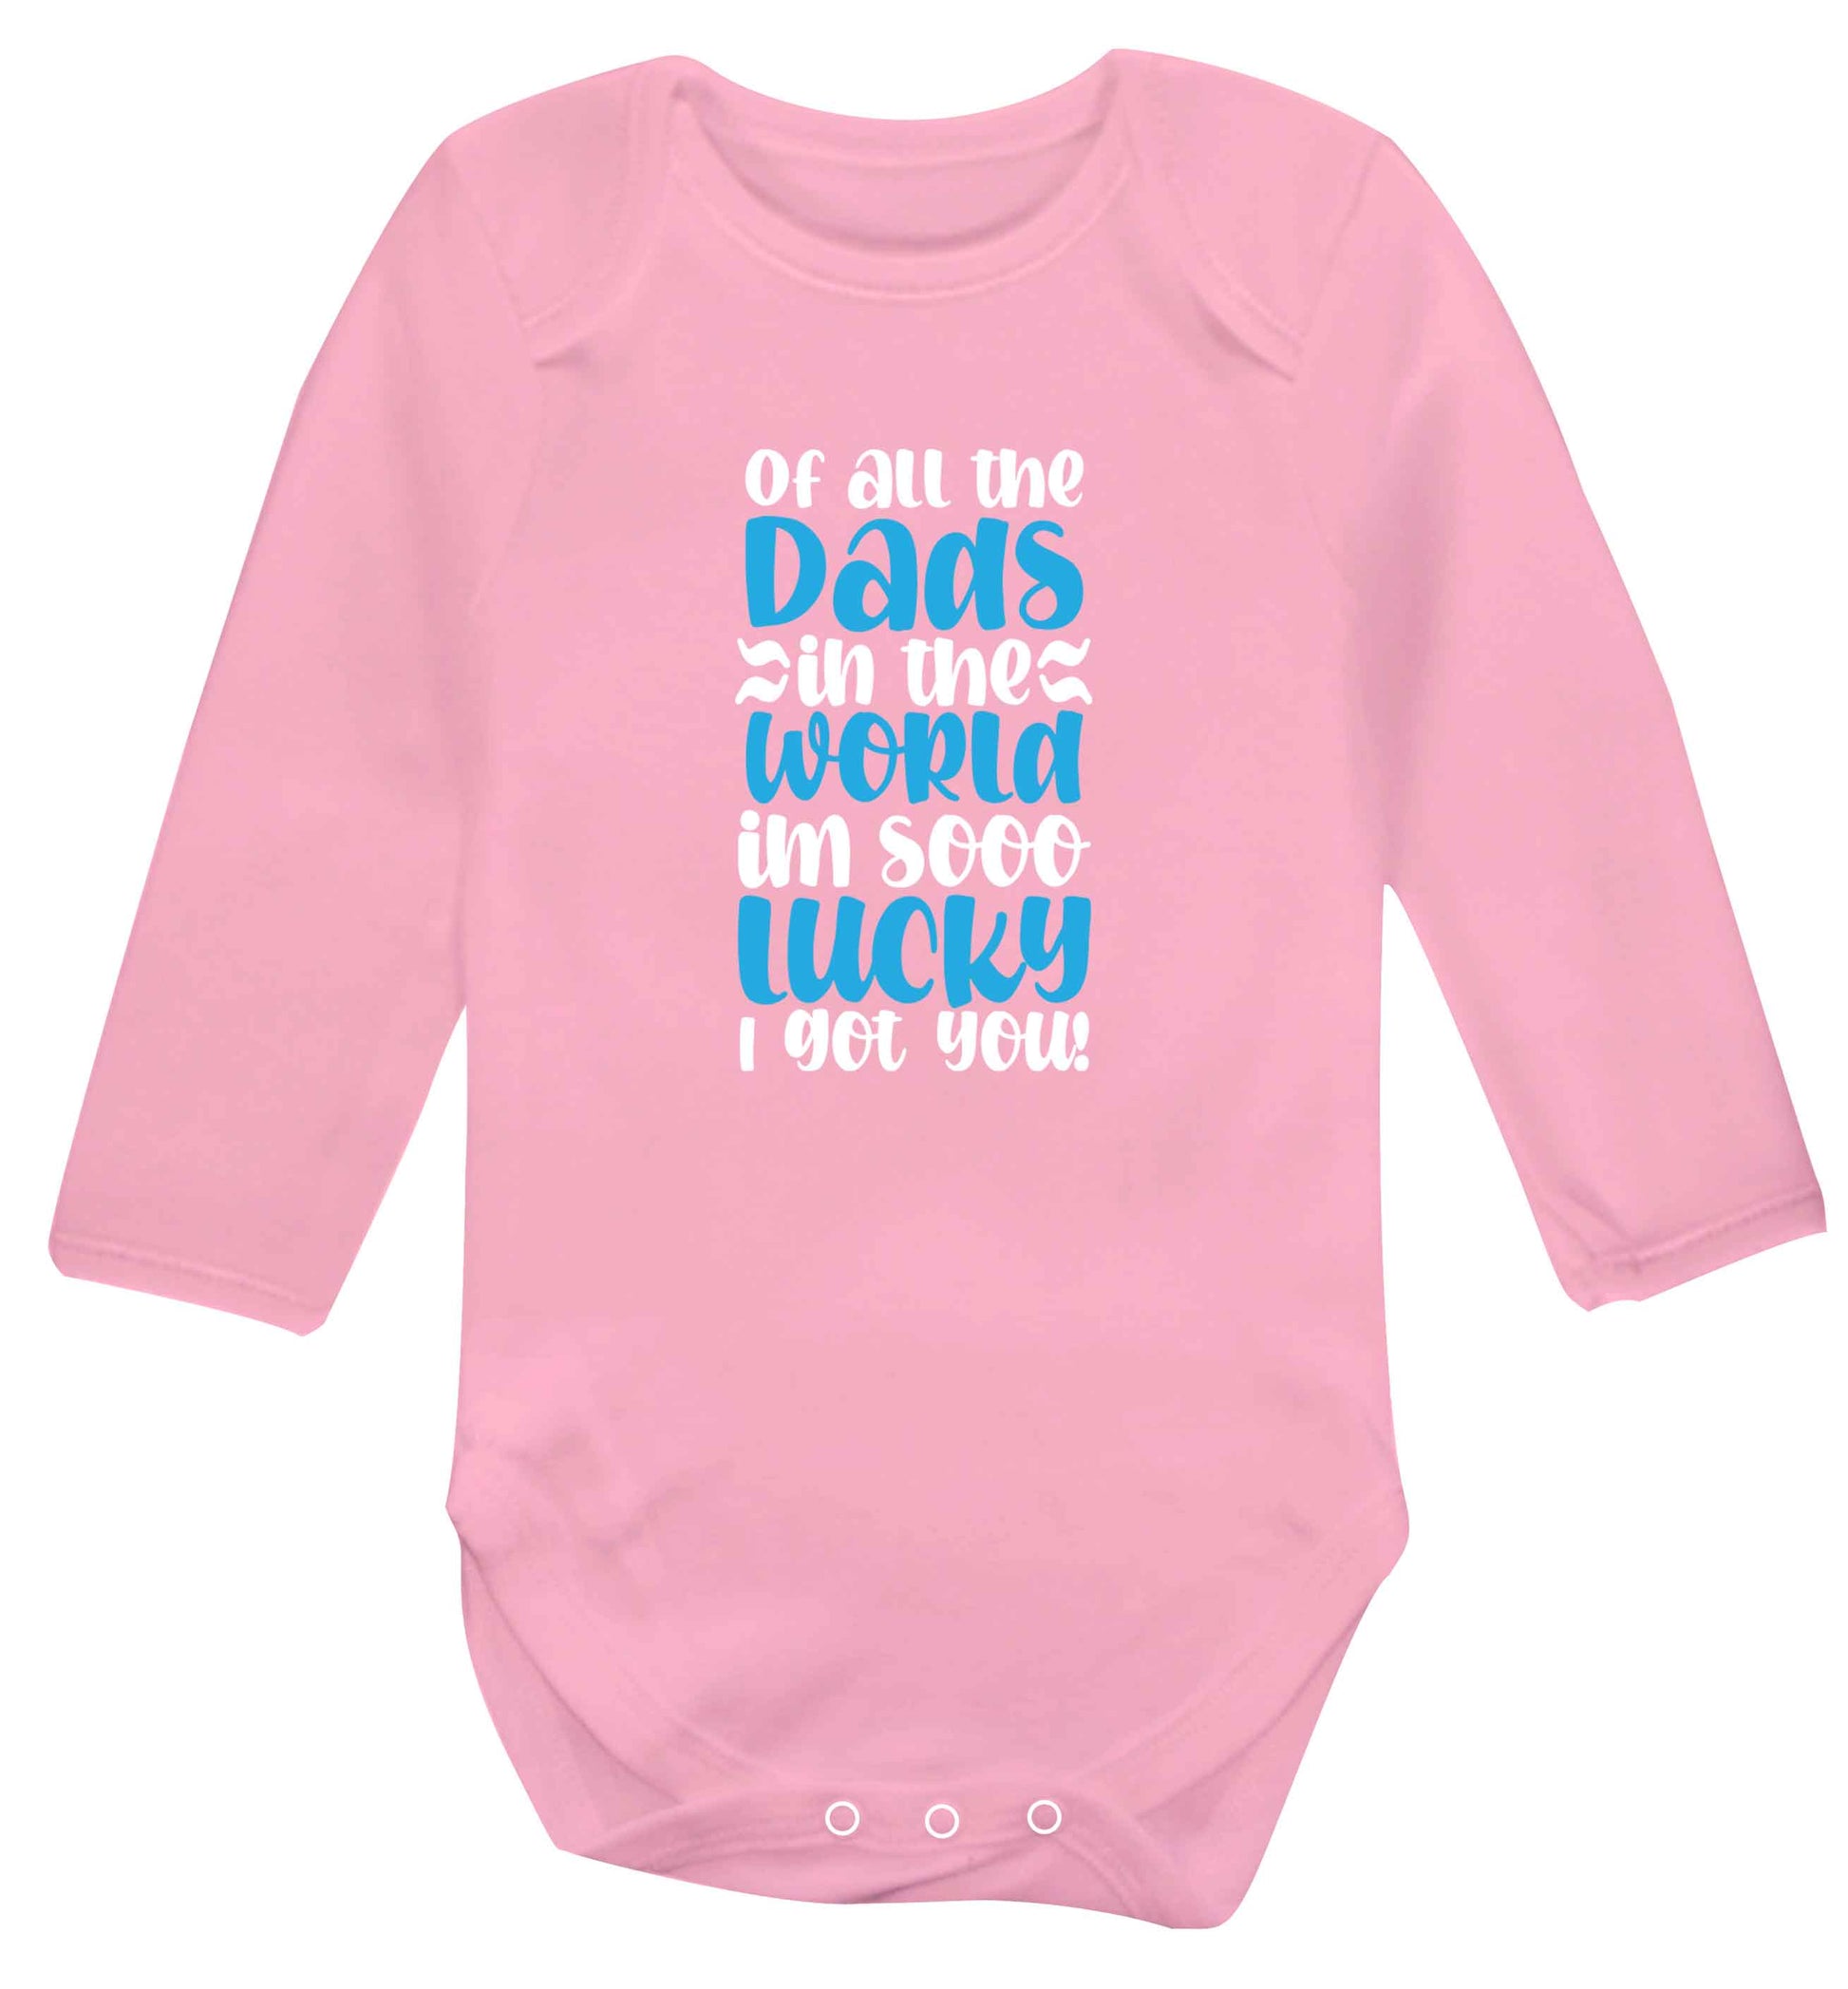 I'm as lucky as can be the worlds greatest dad belongs to me! baby vest long sleeved pale pink 6-12 months